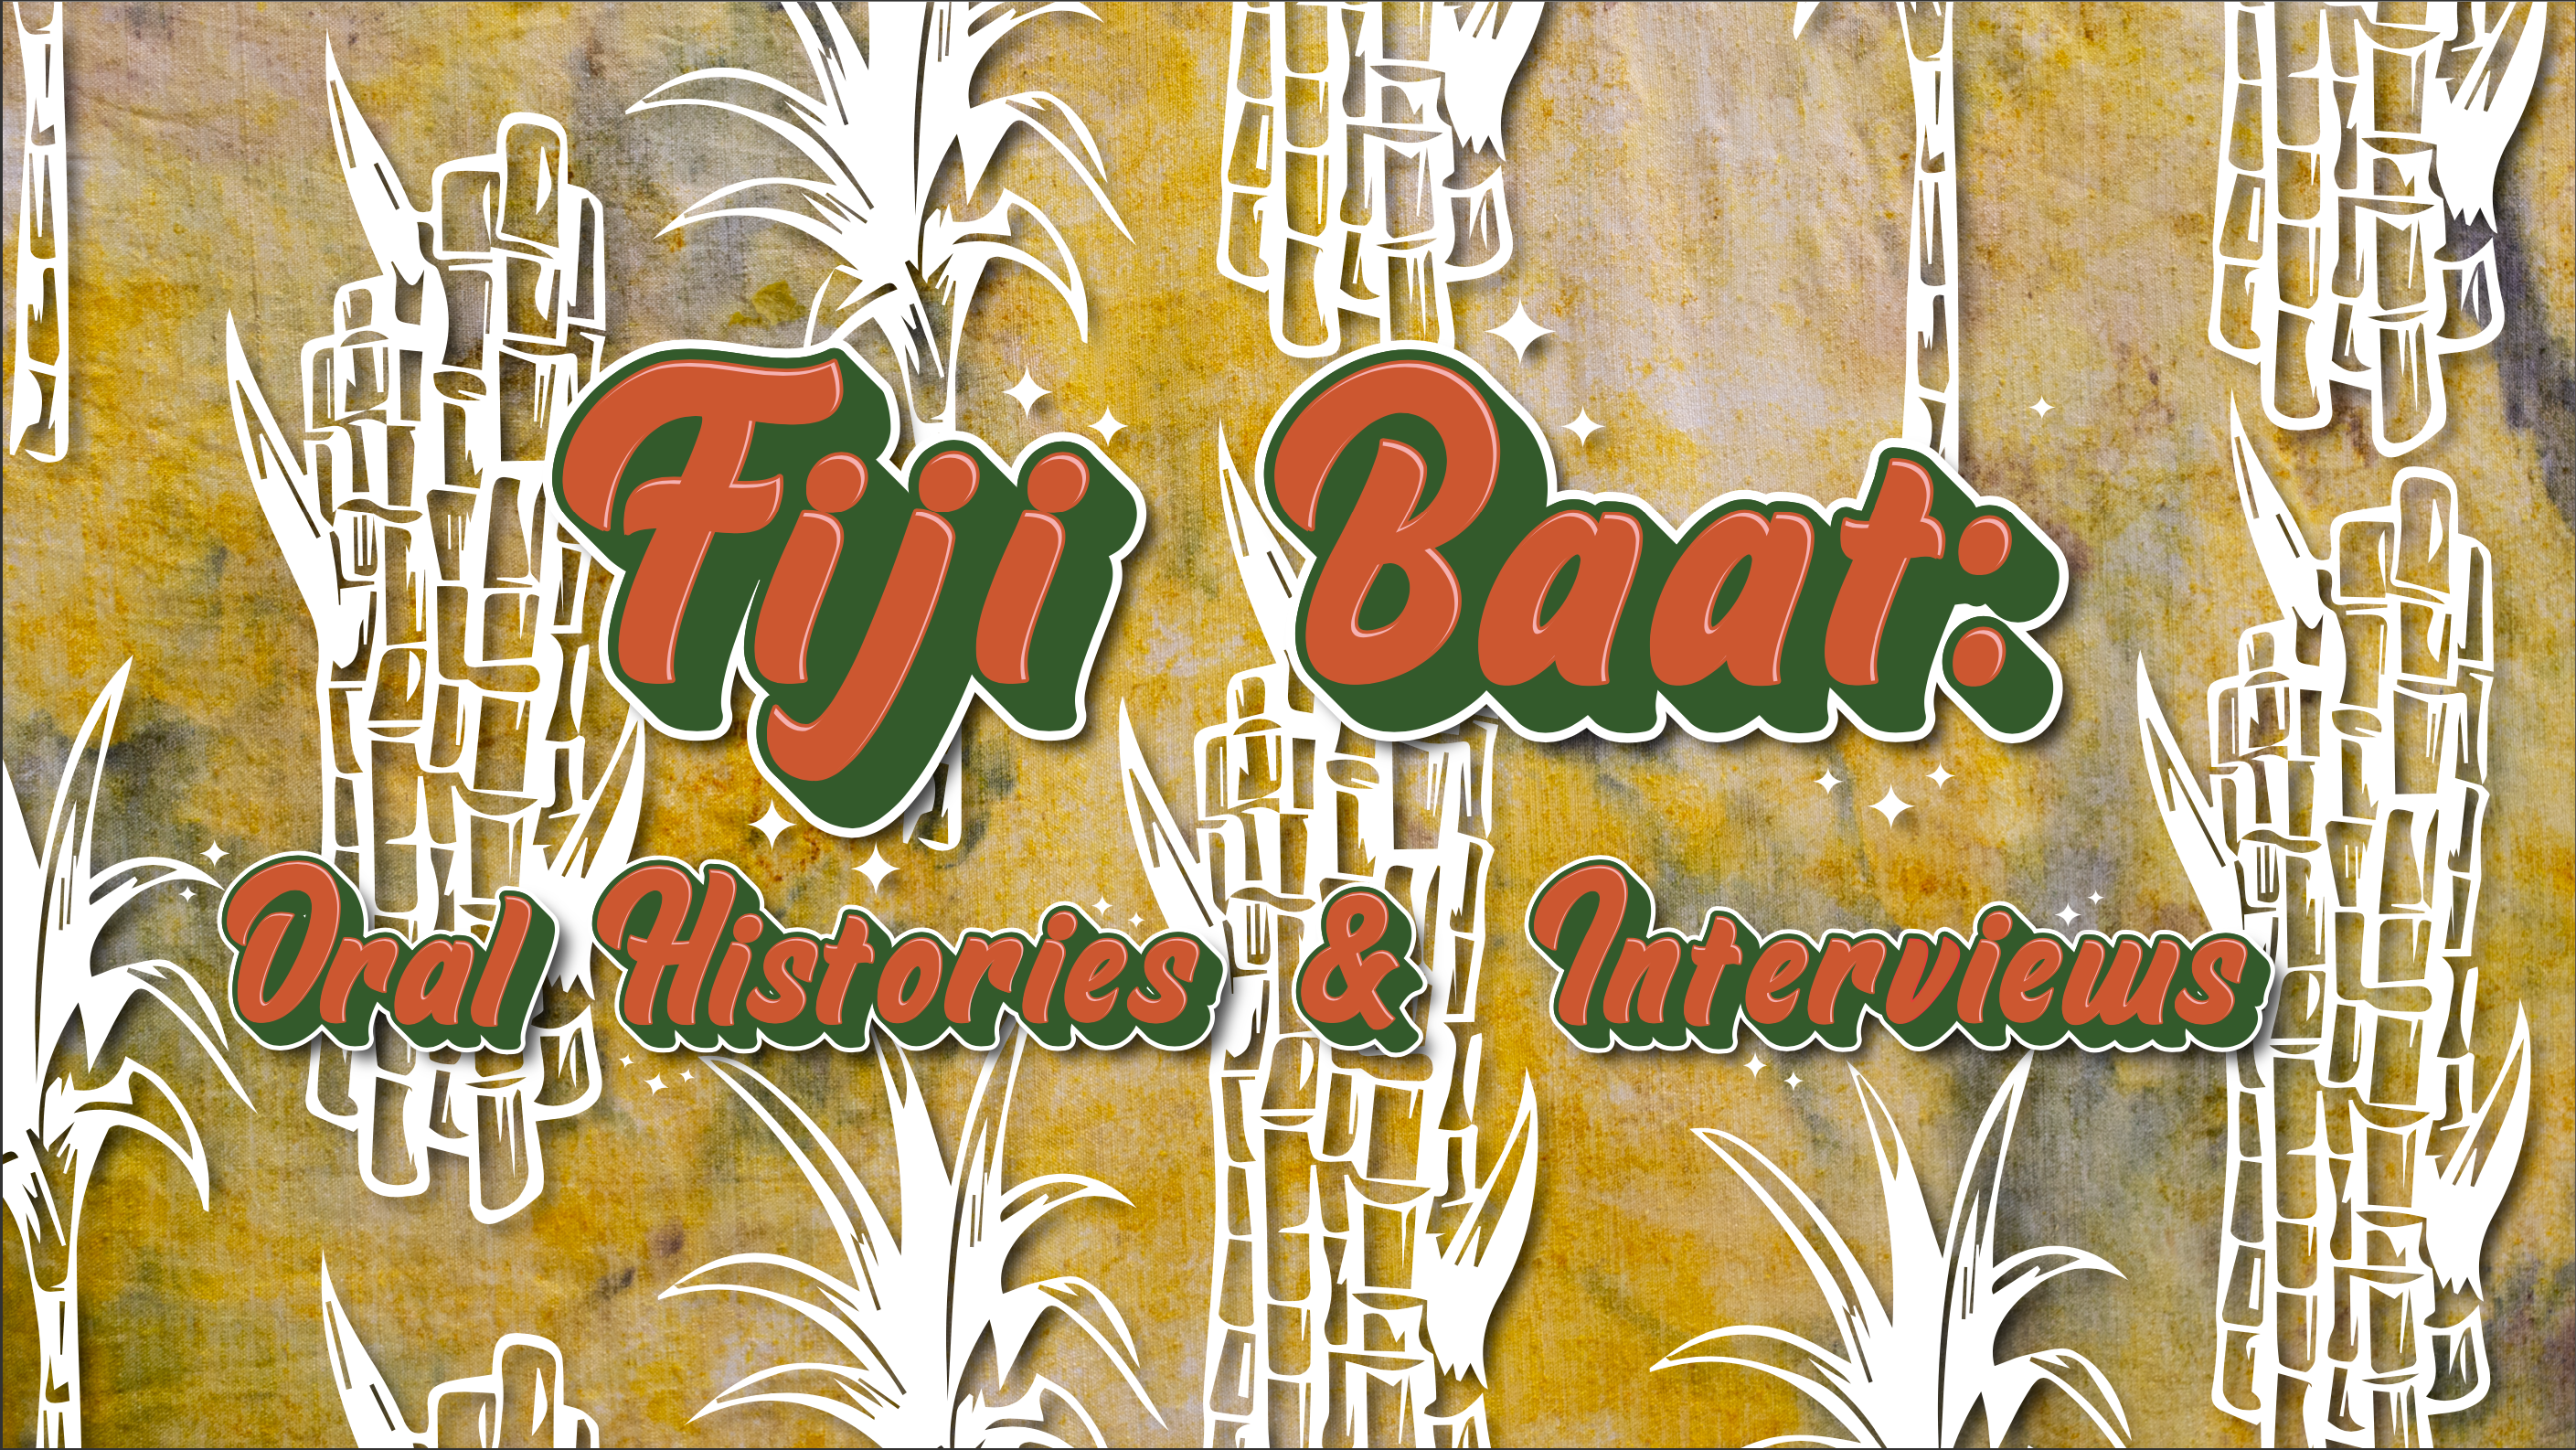 Fiji Baat logo. Background image is a hand-dyed textile with yellow and pink hues made by Quishile. There are graphics of white sugarcane shoots. Text in orange reads: Fiji Baat: Oral Histories & Interviews. 